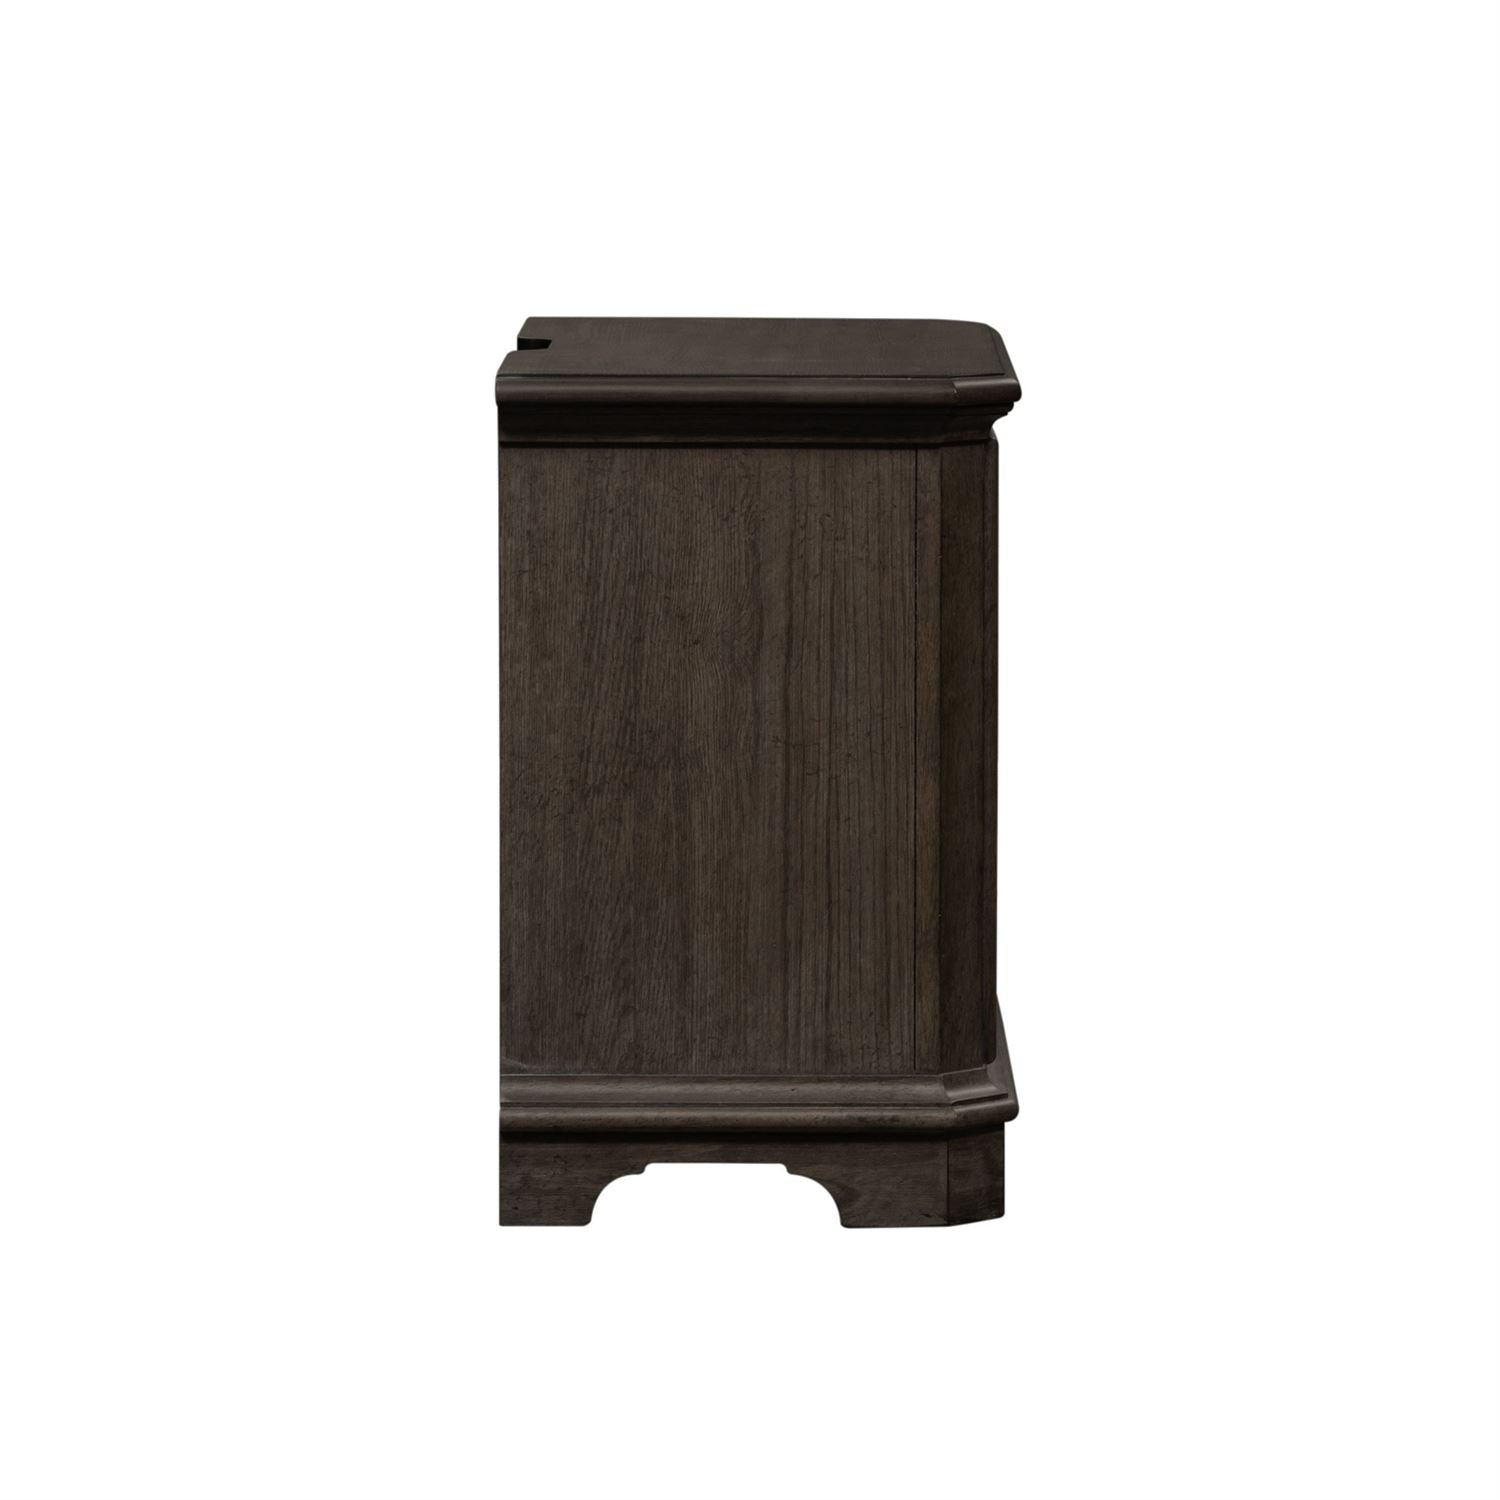 Townsend Place 2 Drawer Night Stand